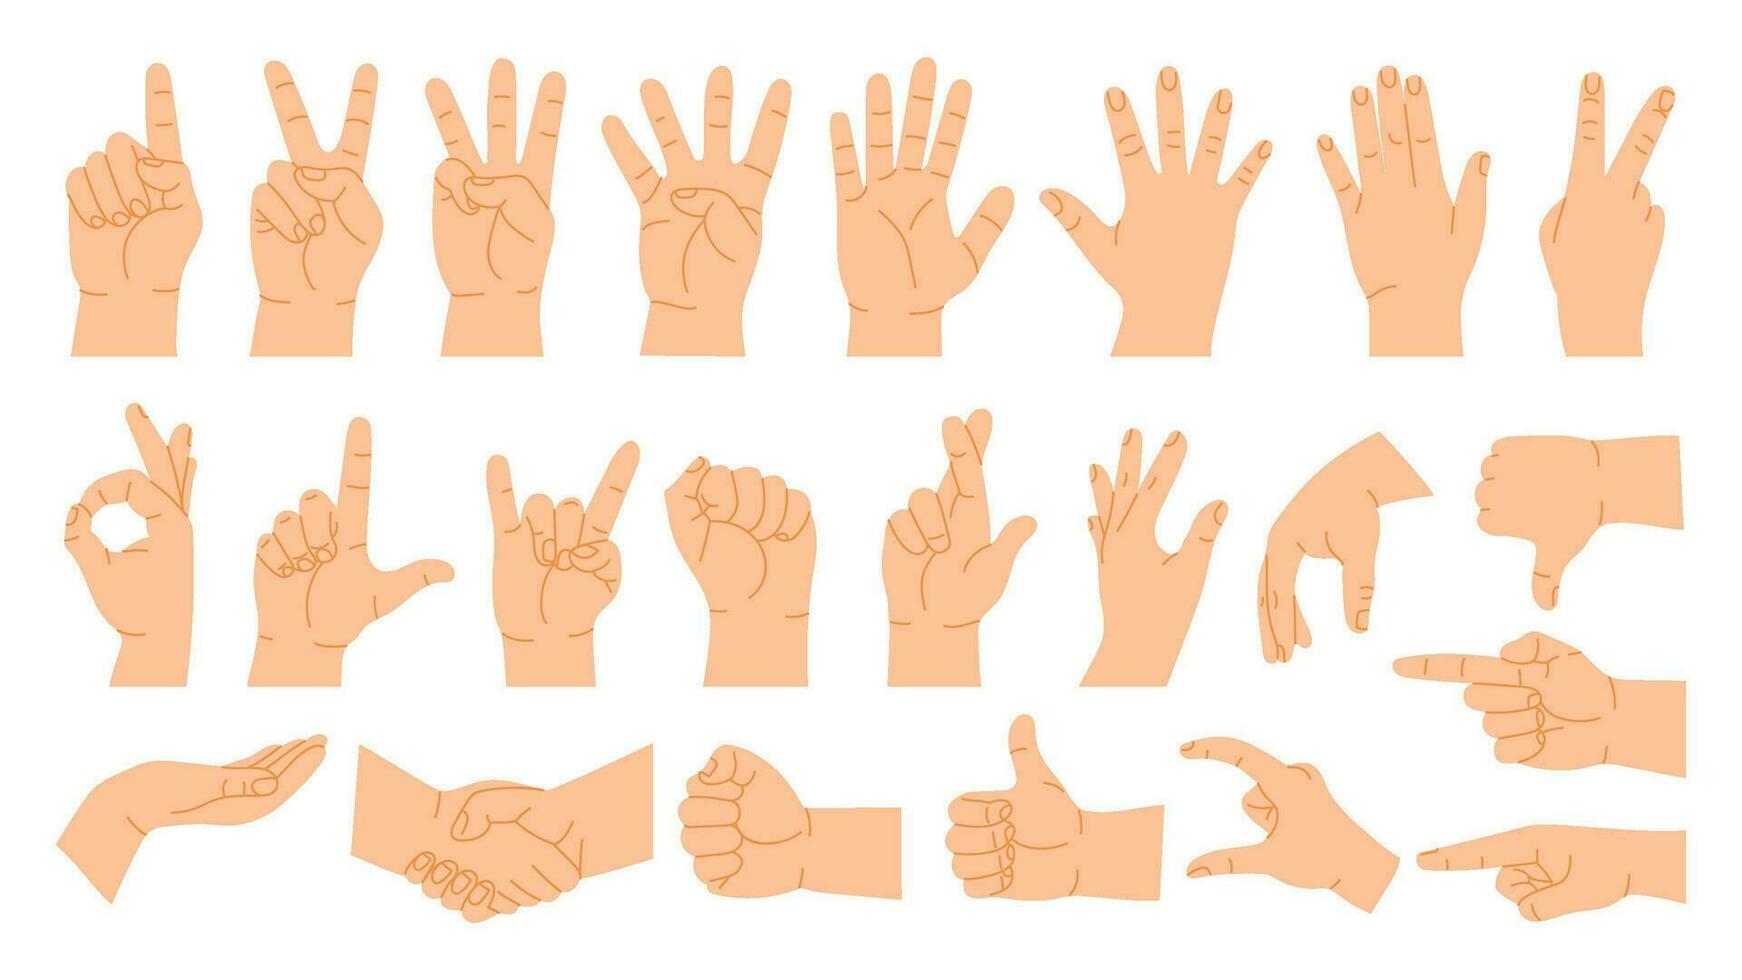 Hands poses. Cartoon hand gestures count on fingers, pointing, handshake, thumb up like and dislike. Human palm vector illustration set